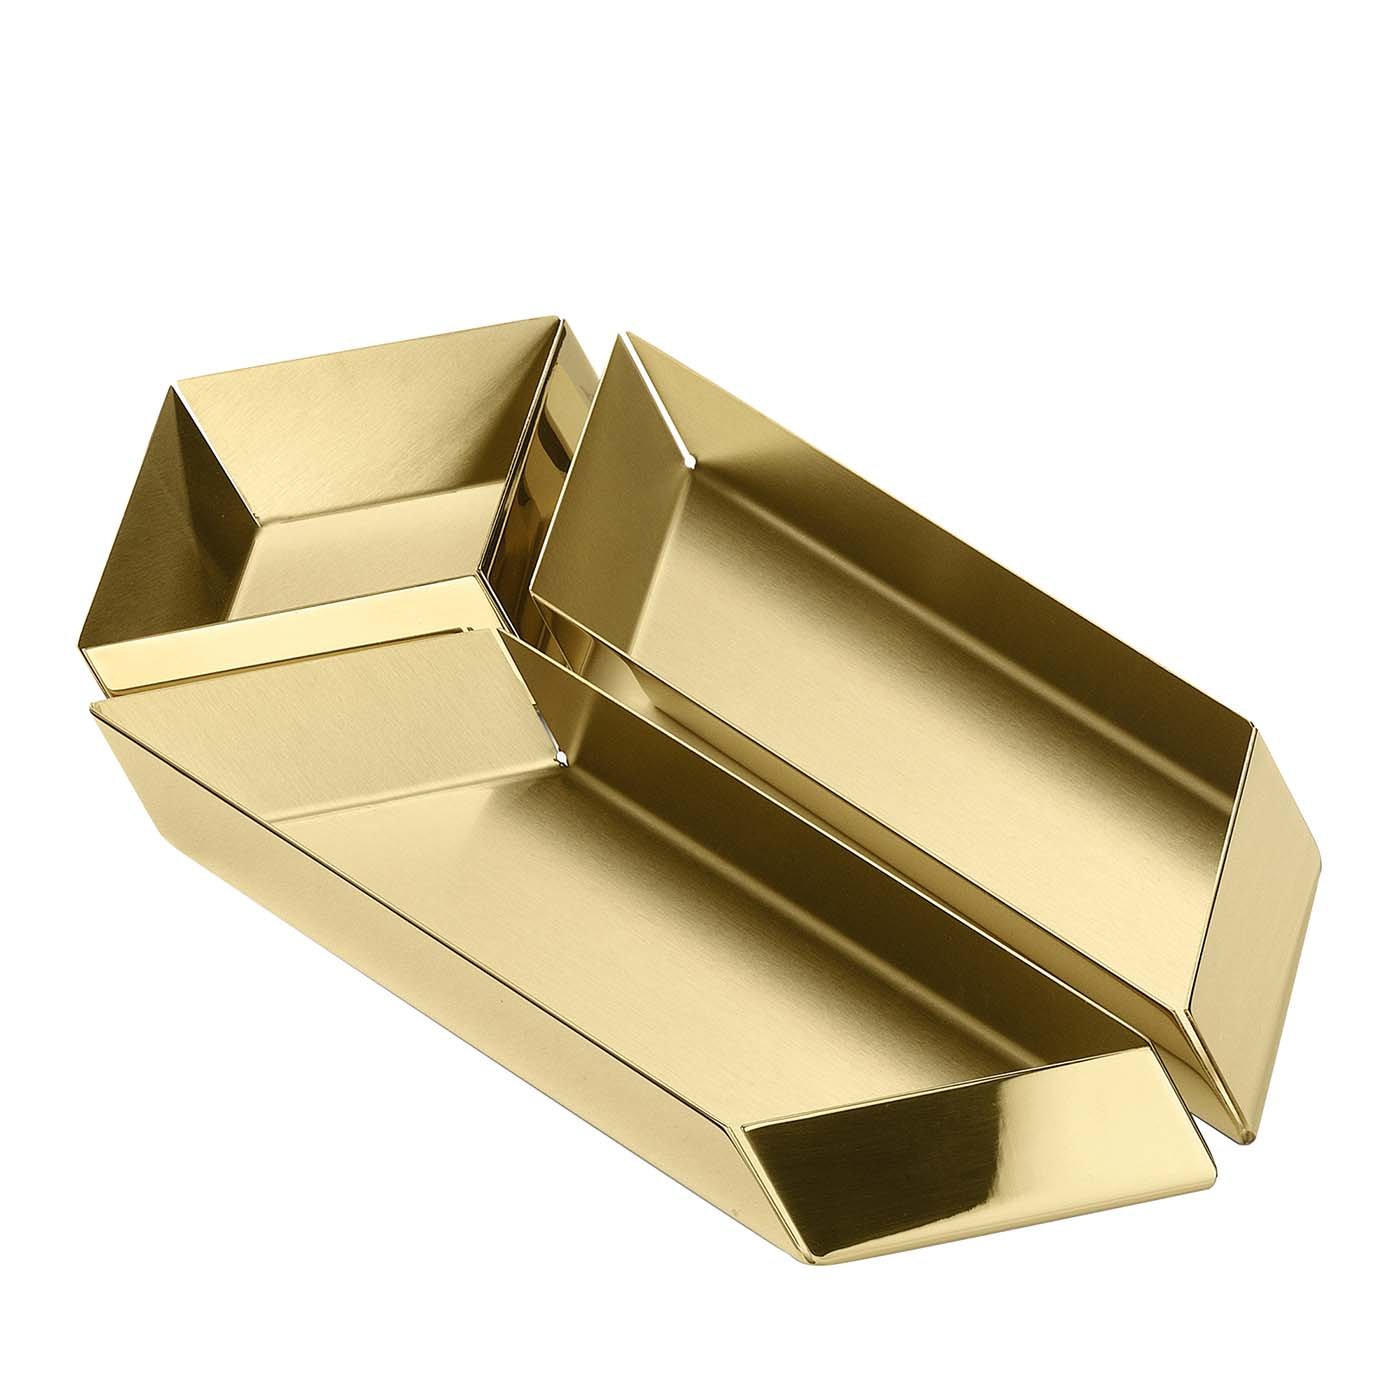 Set of 3 Axonometry Small Parallelepiped Brass Trays by Elisa Giovannoni - Main view